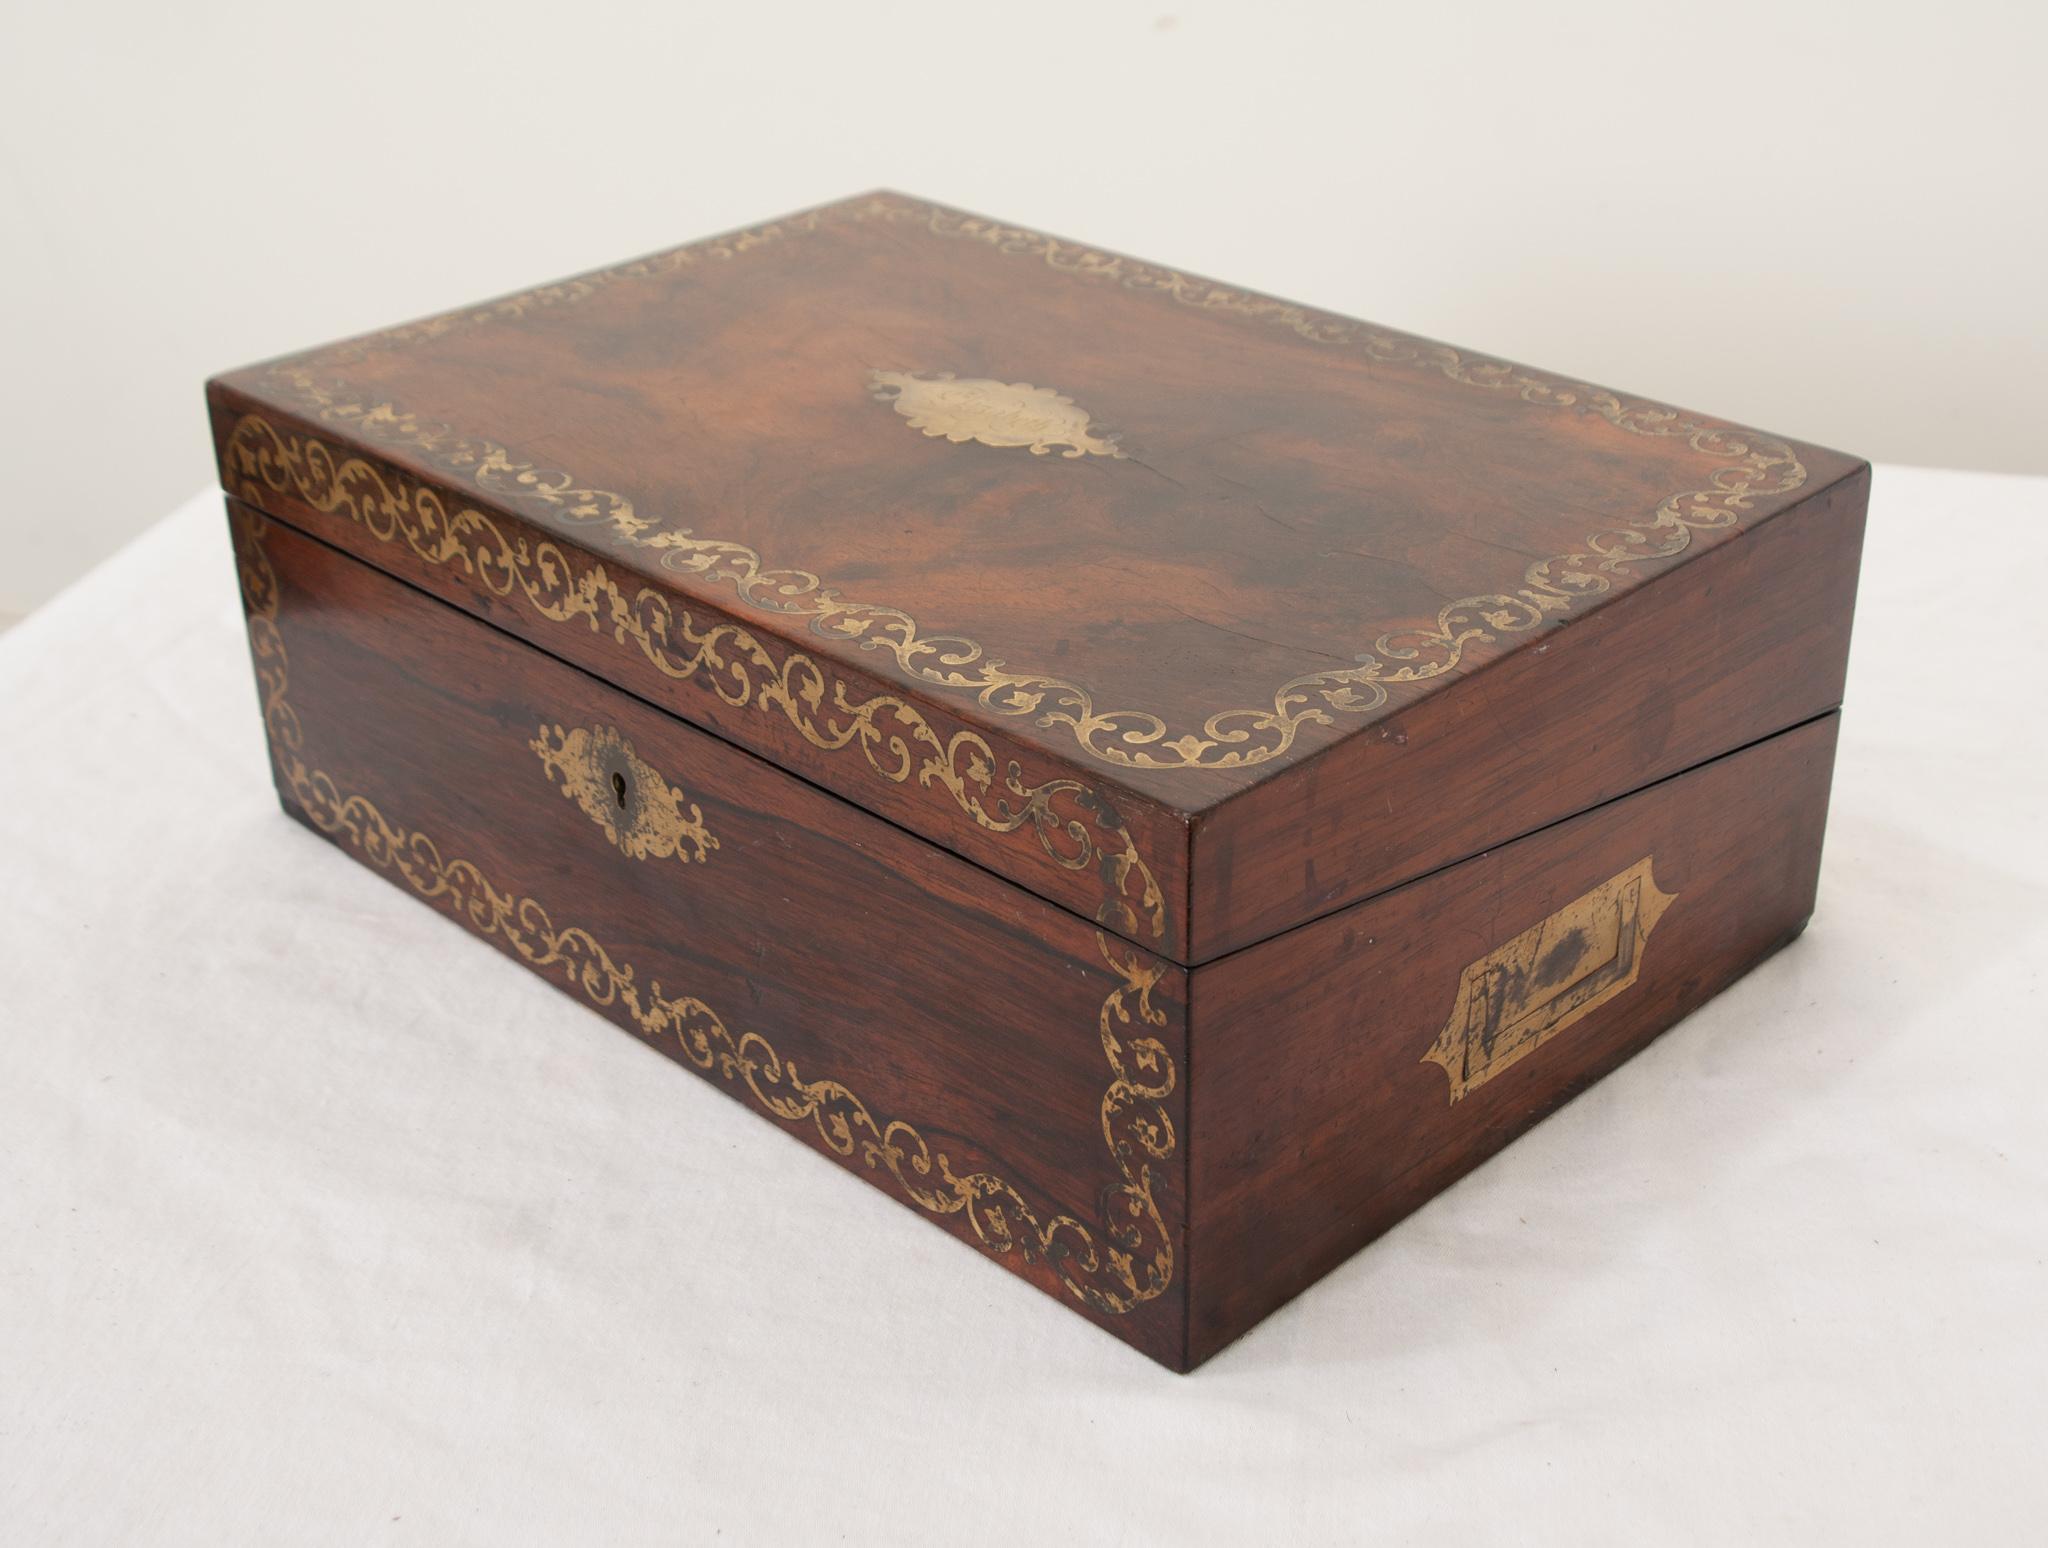 A French traveling writing box made of rosewood during the 1800’s. The exterior has an intricately detailed brass inlaid banding with an ogee cartouche in the center of the top, monogrammed “Elizabeth”. The box opens up to reveal its original sloped